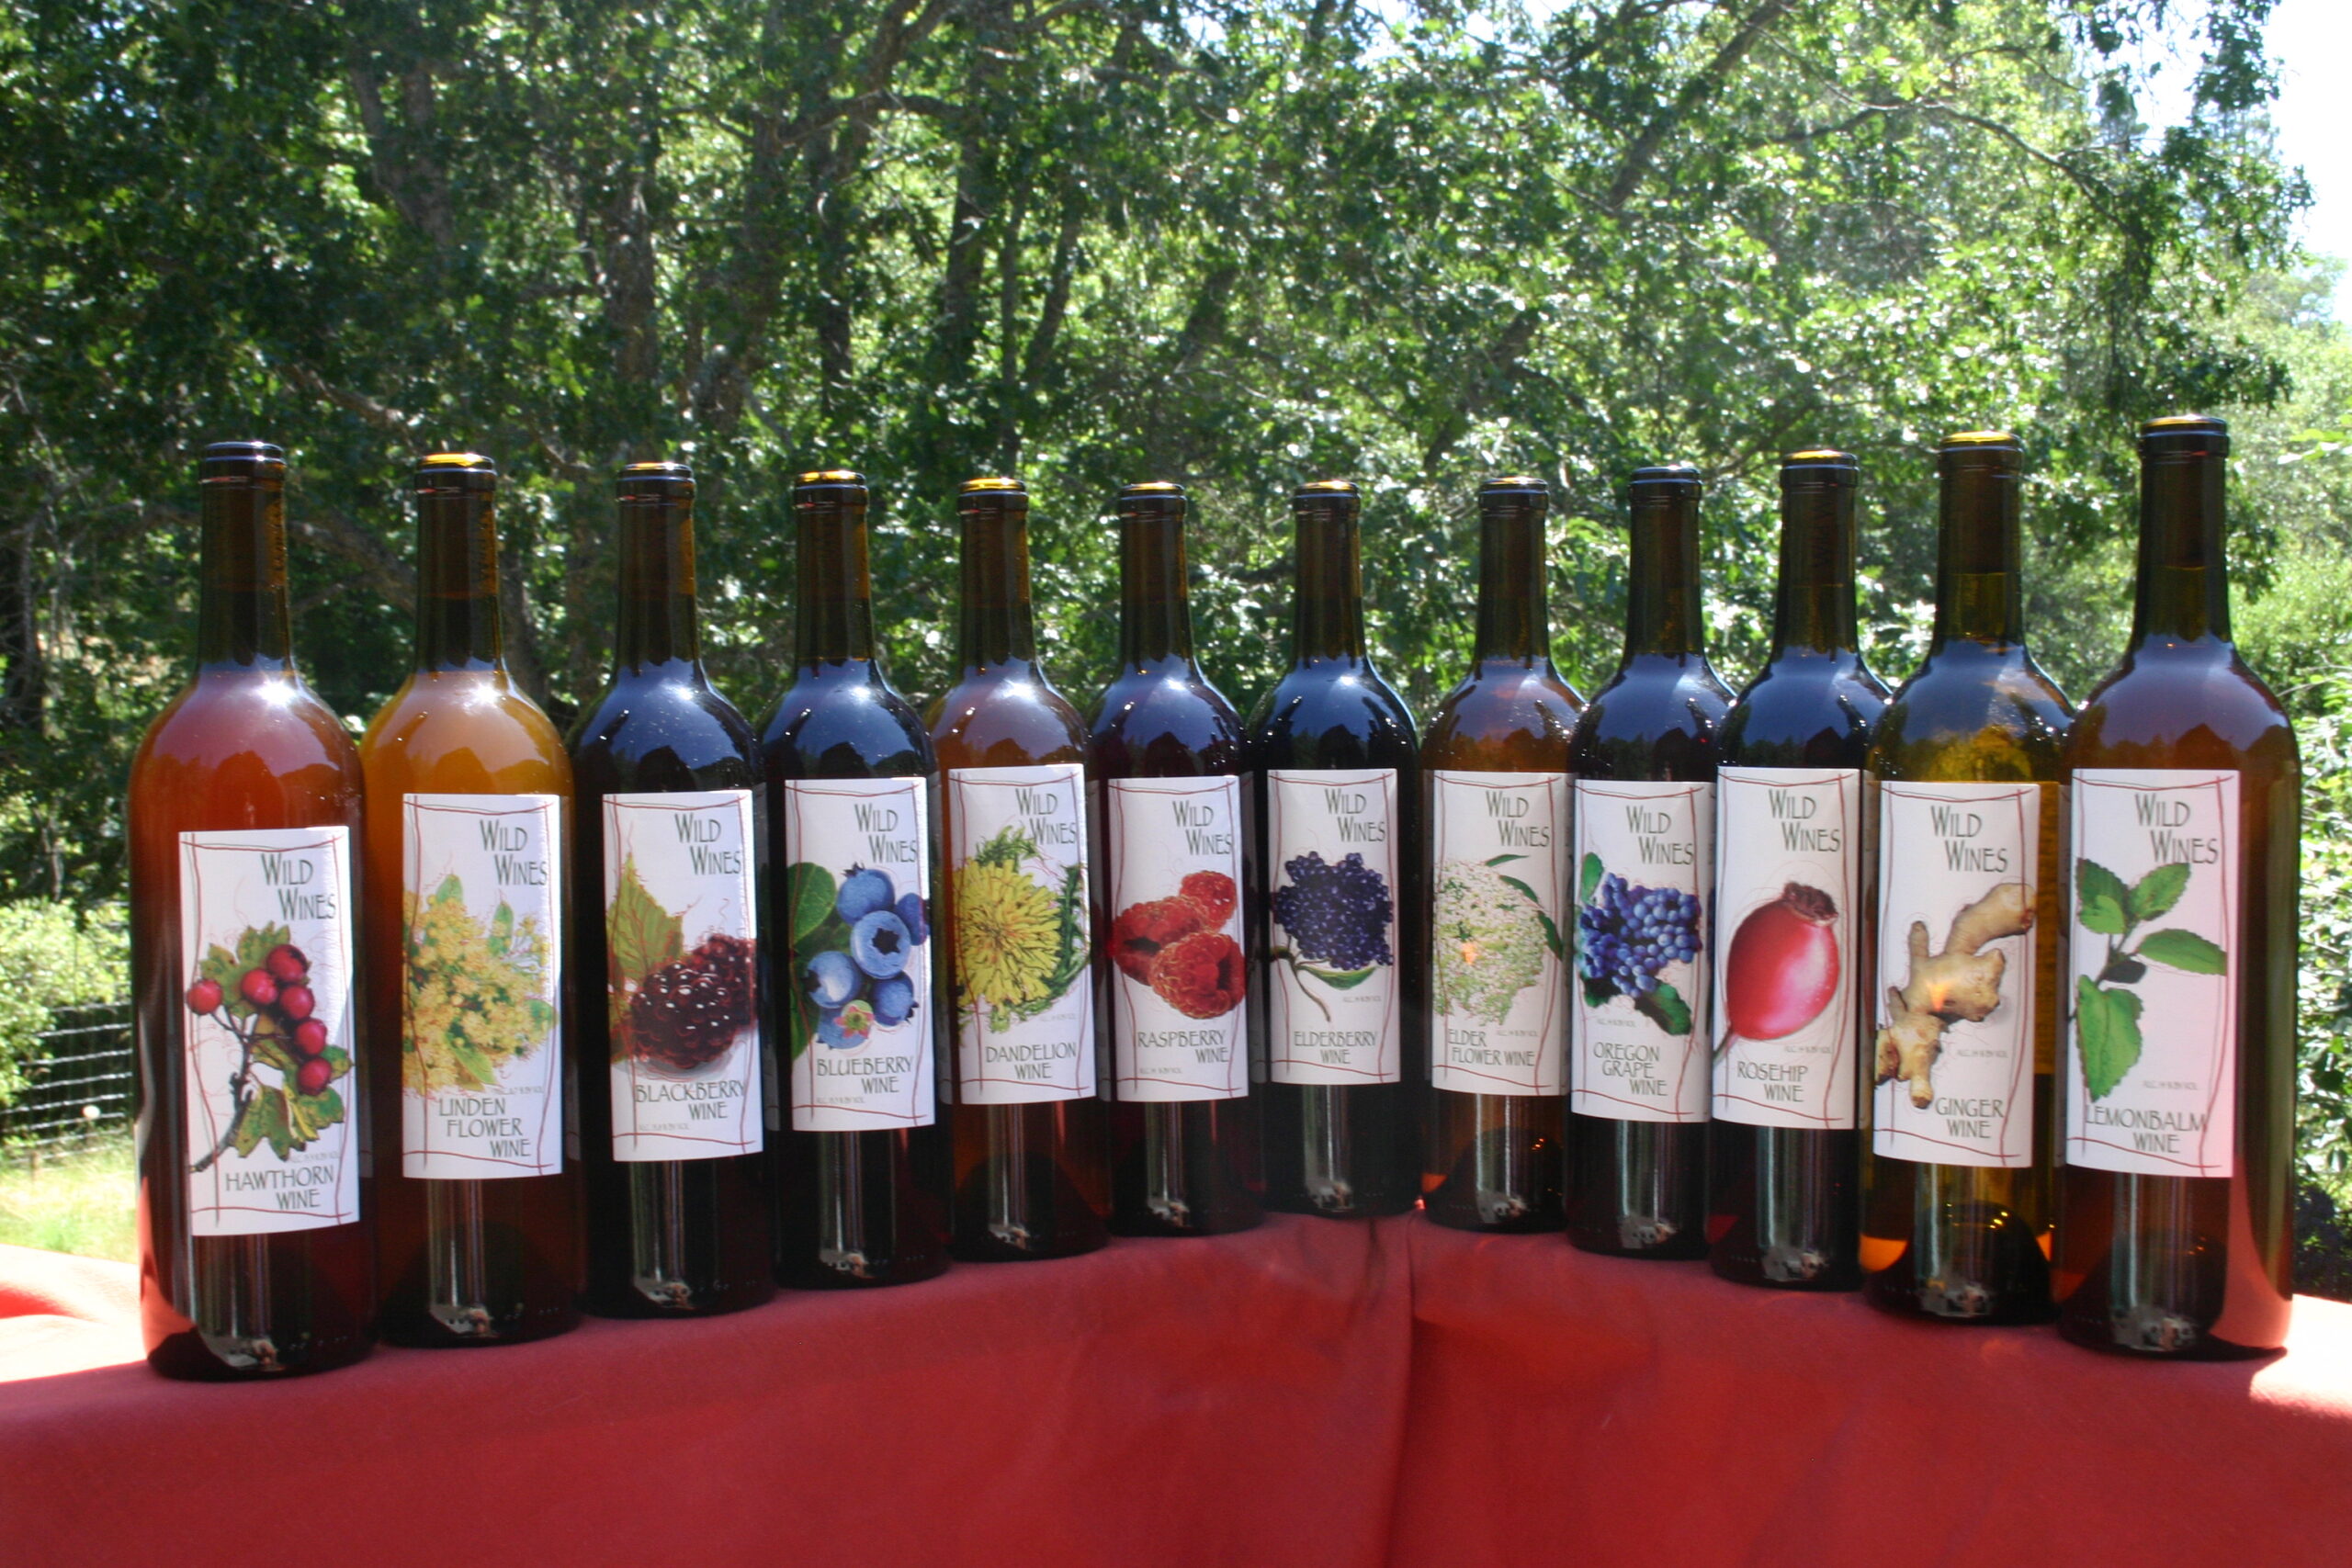 All You Ever Wanted to Know about Wild Wines